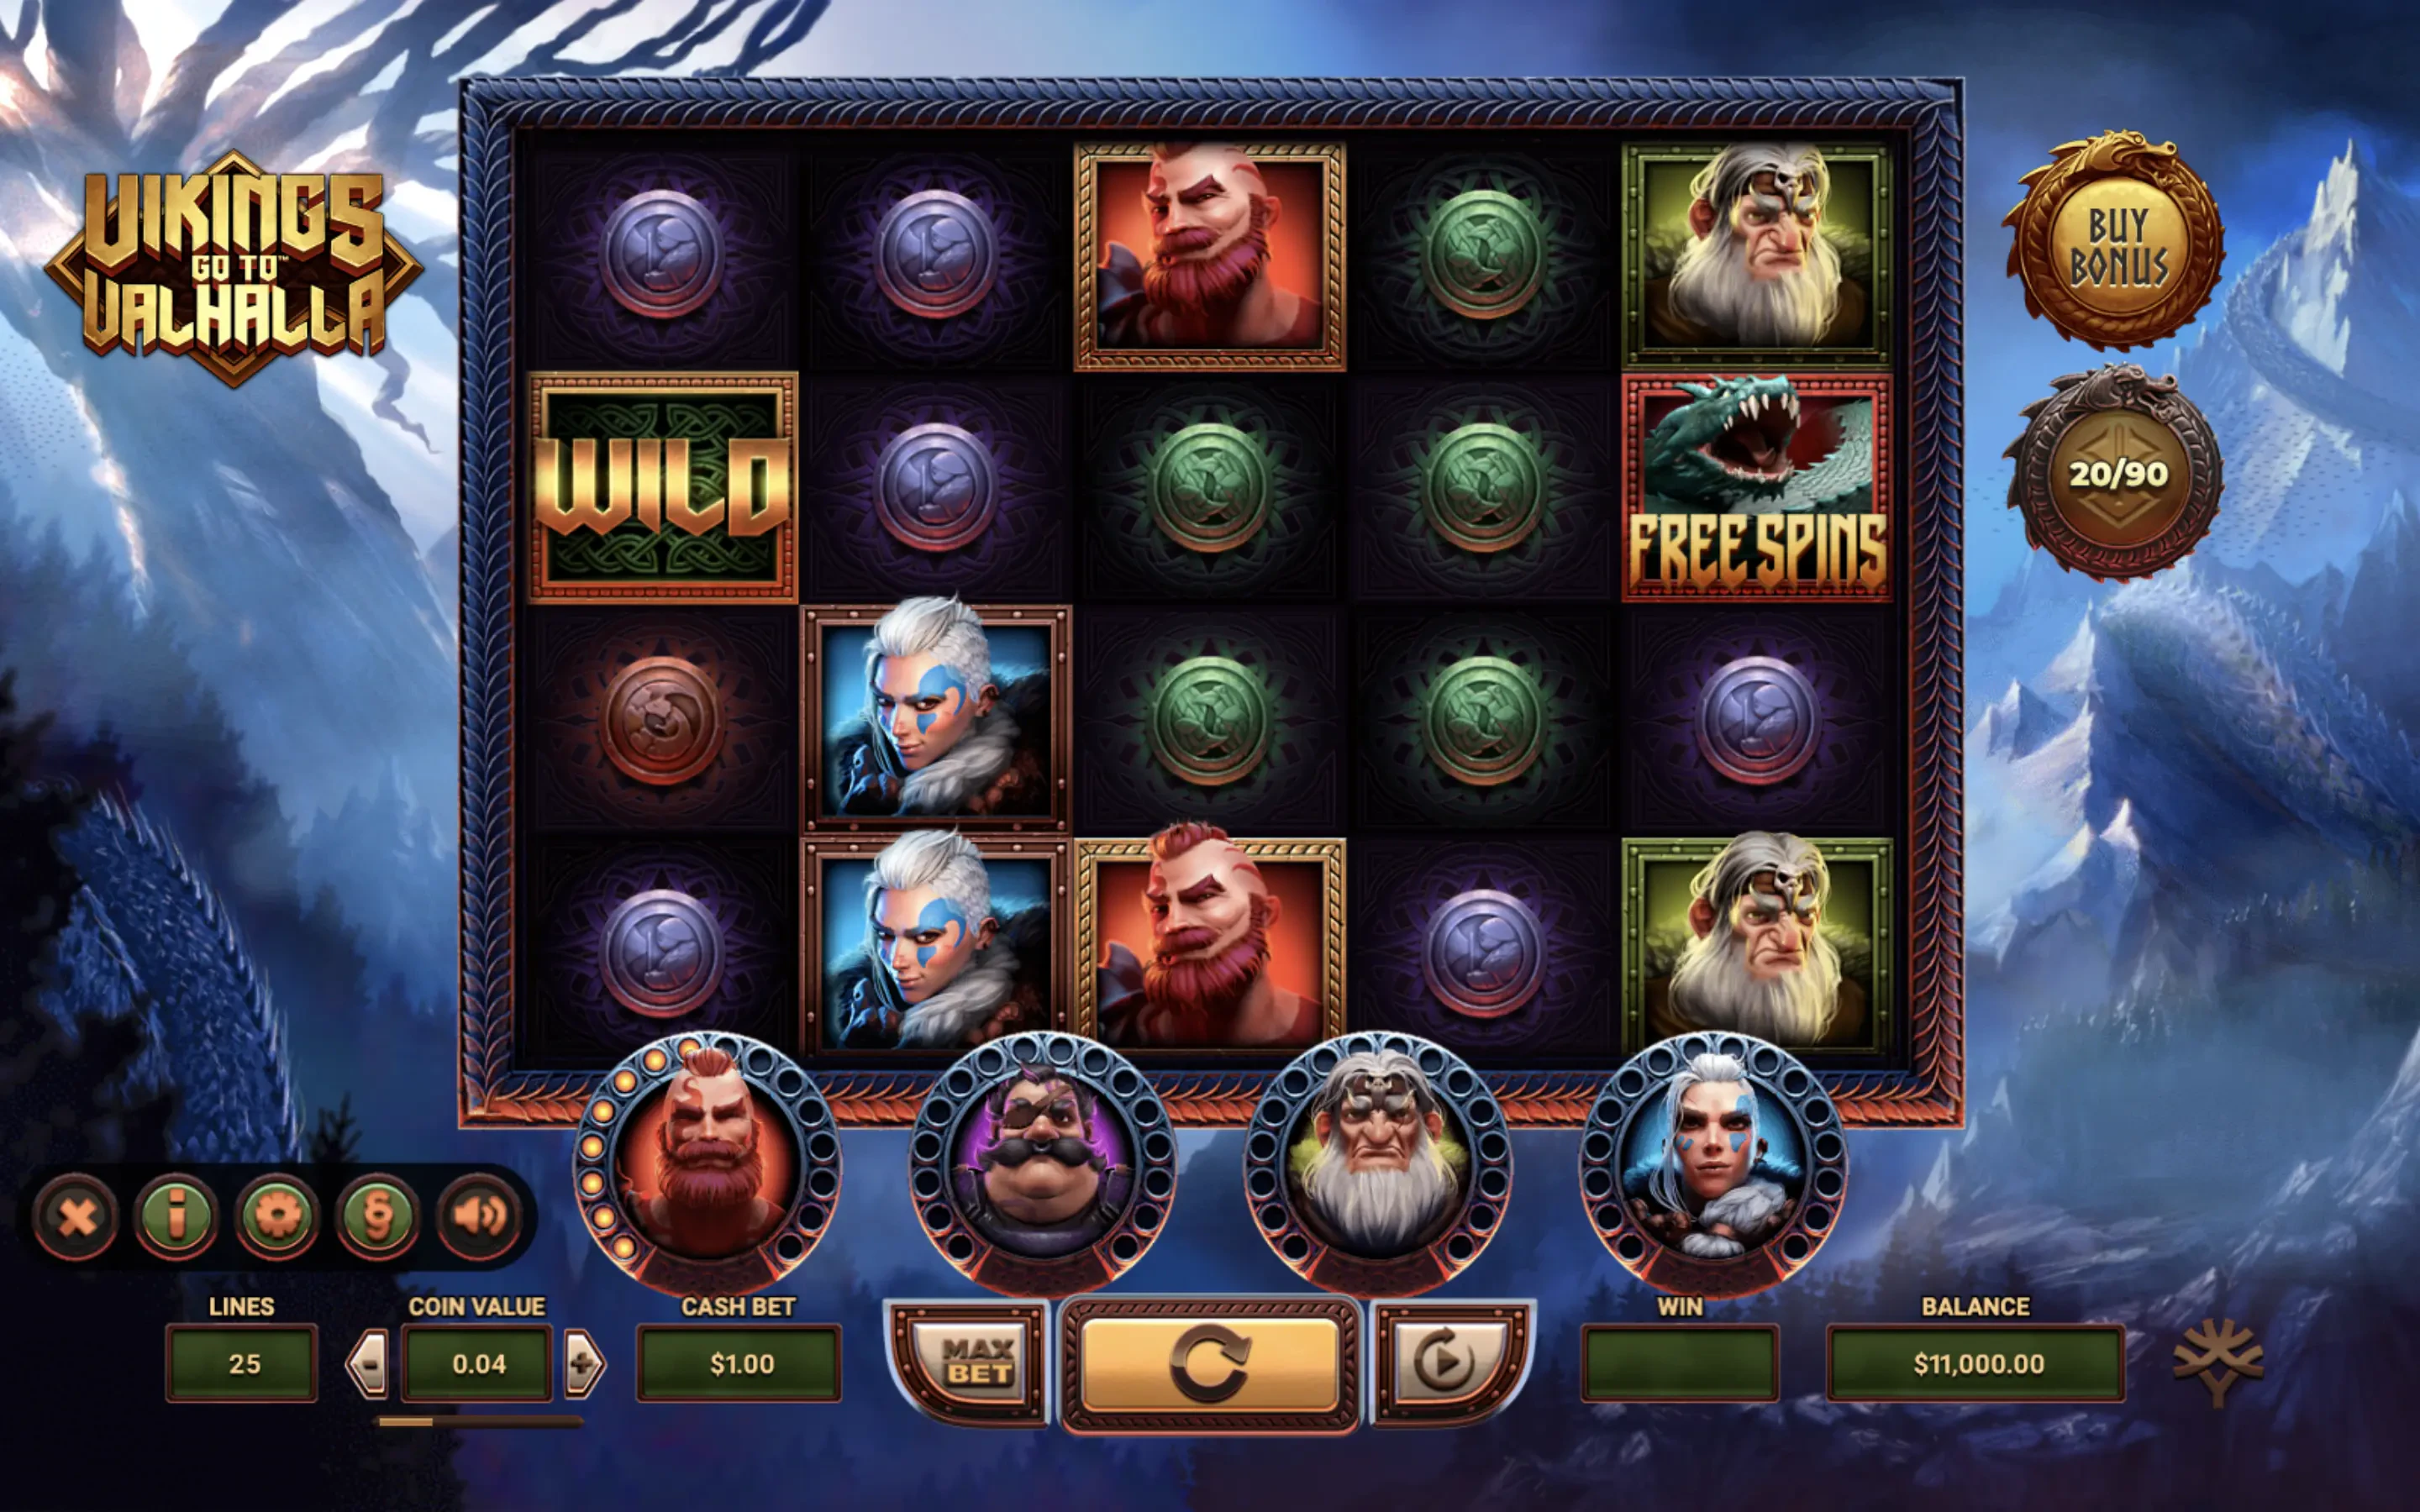 The Vikings Go To Valhalla slot machine by Yggdrasil